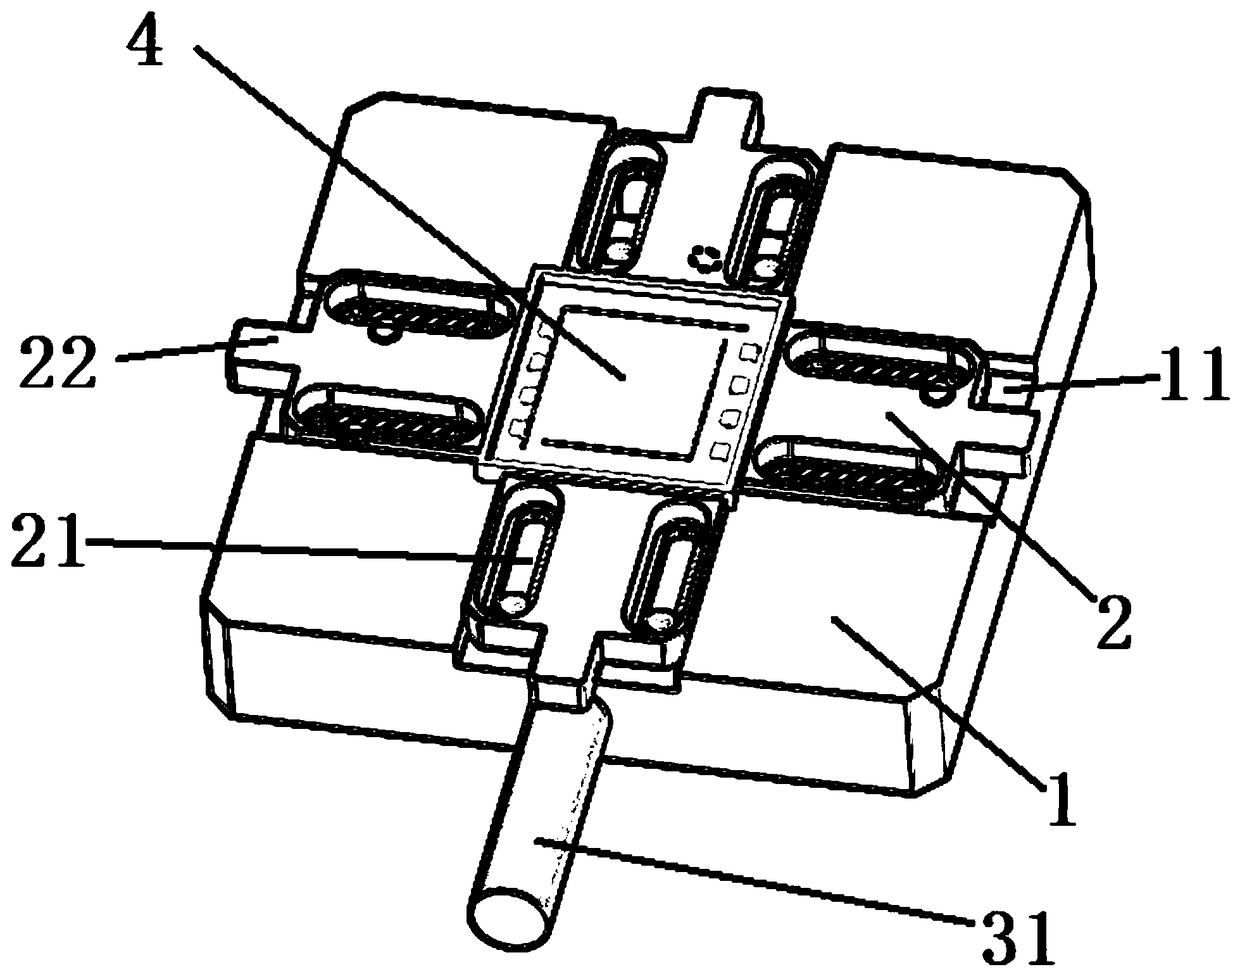 An adjustable parallel seam welding fixture for surface mount ceramic shell